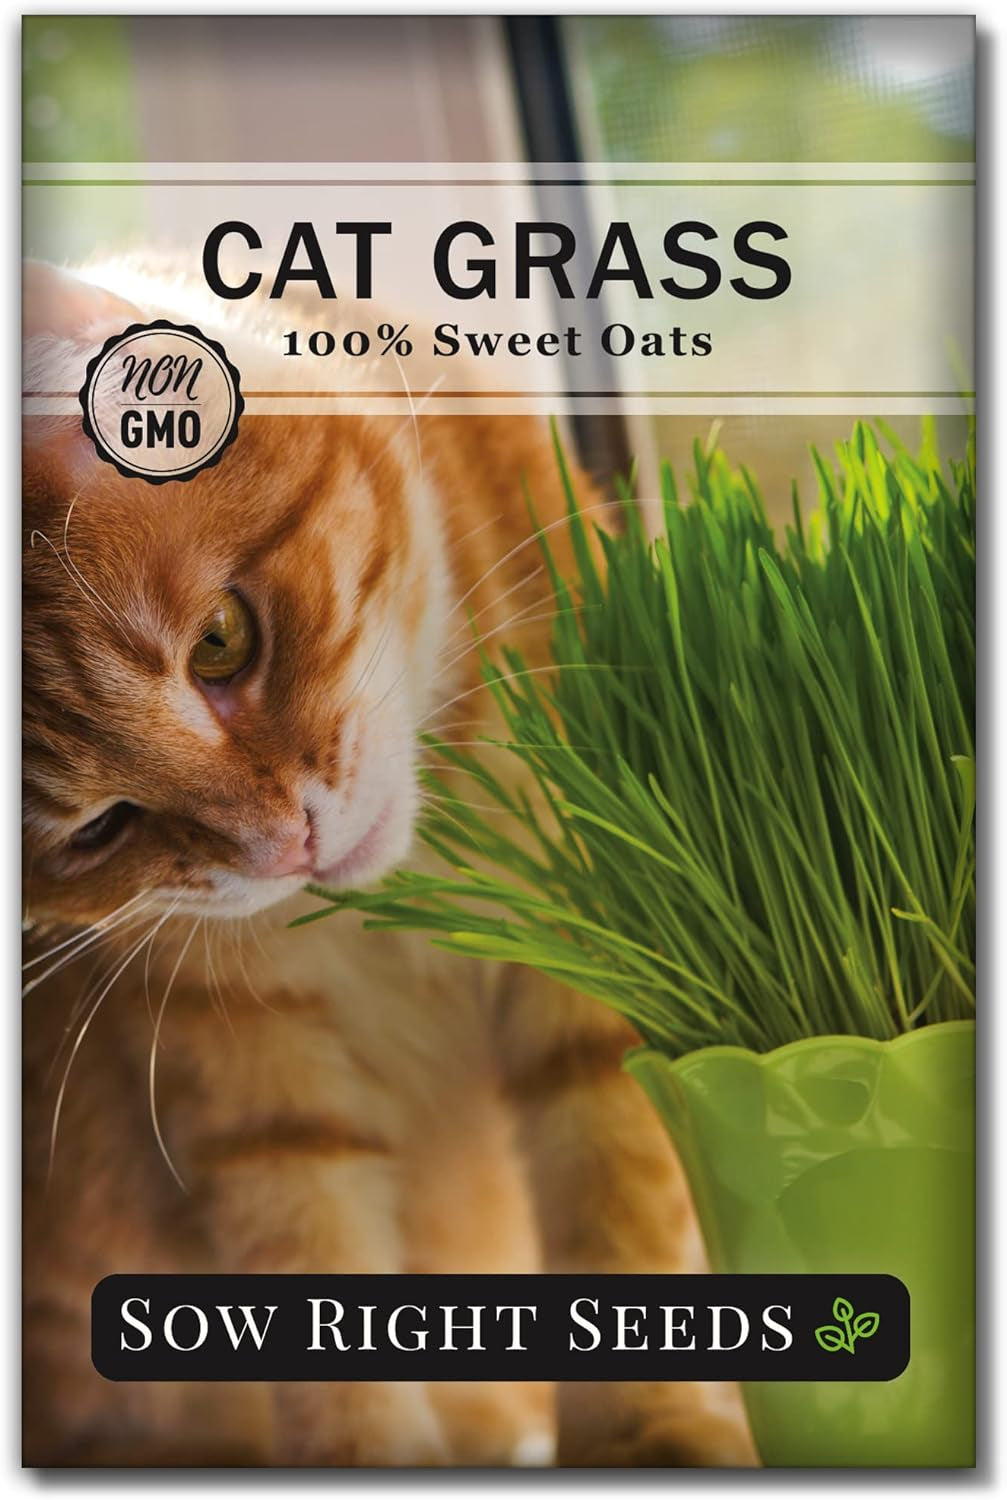 - Catnip and Cat Grass Seed Collection for Planting Indoors or Outdoors - Includes Popular Herb Catnip and Cat Grass (100% Sweet Oat Grass) - Non-Gmo Heirloom Packet - Pet Friendly